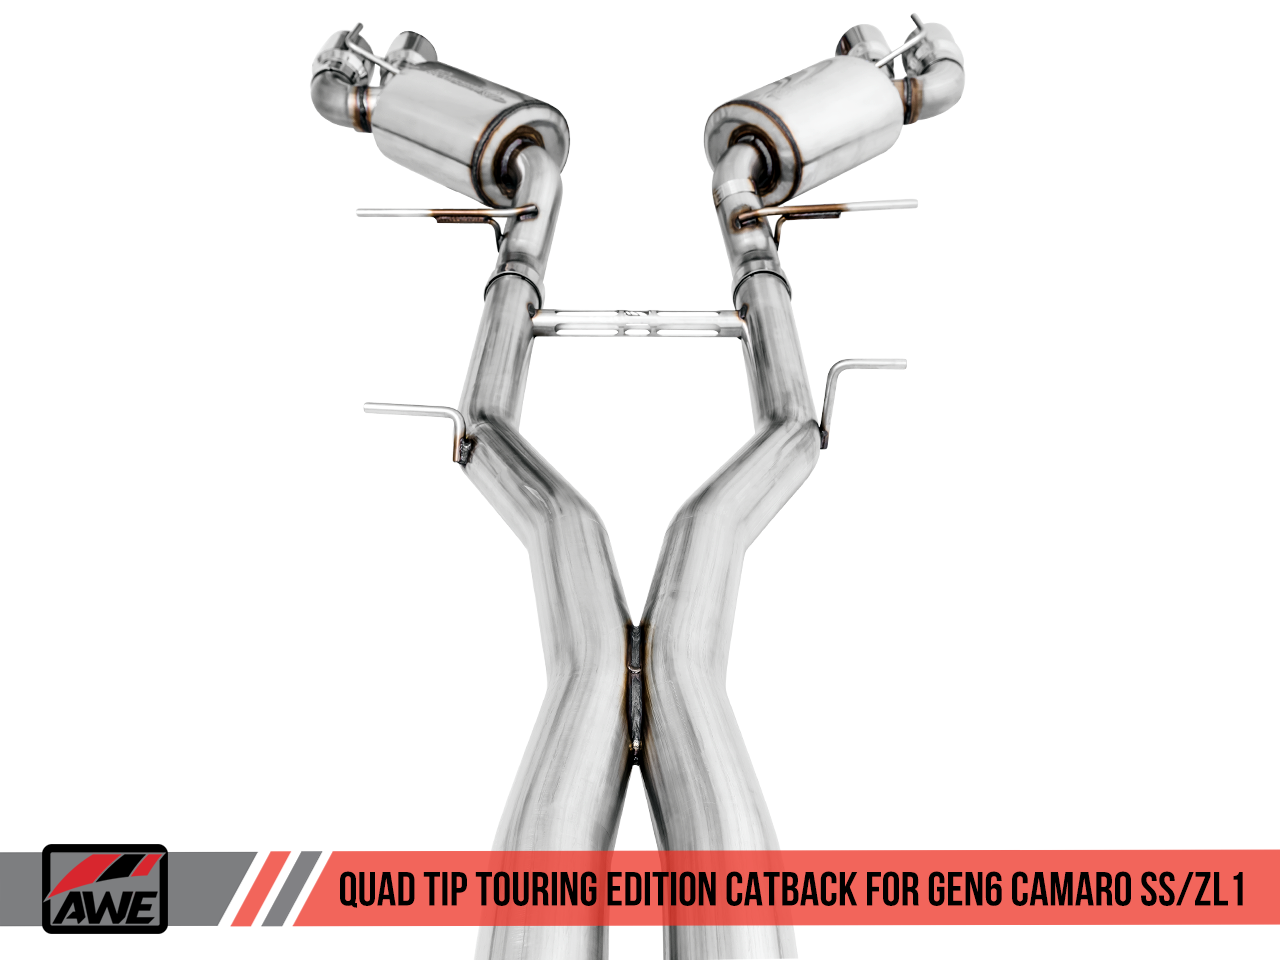 AWE Tuning Touring Edition Catback Exhaust for Gen6 Camaro SS / ZL1 - Resonated - Diamond Black Tips (Quad Outlet)